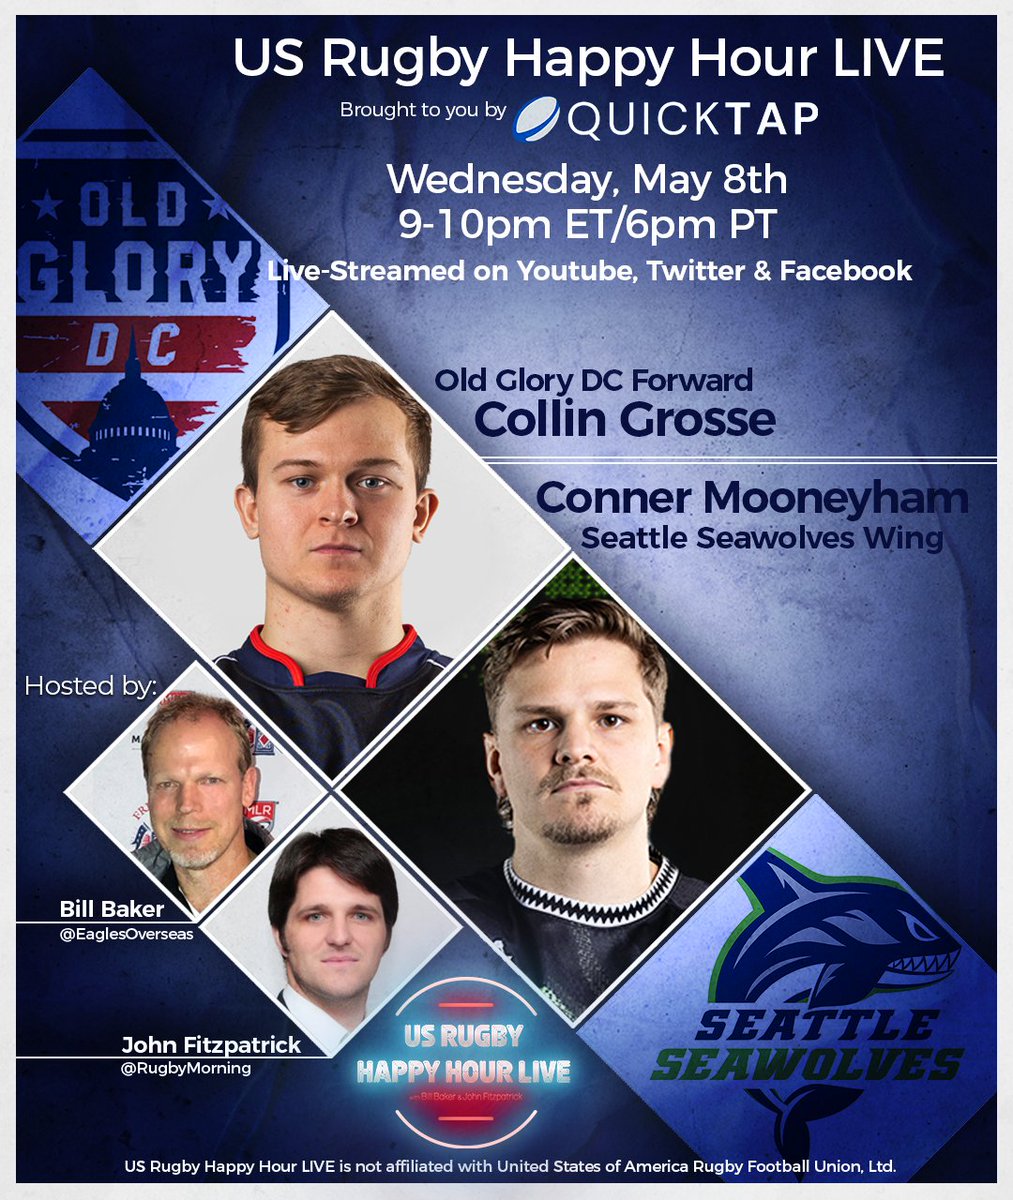 🚨 Tomorrow on US Rugby Happy Hour LIVE, two players hoping to make their senior debuts for USA this year, Old Glory DC’s Collin Grosse and Seattle Seawolves’ Conner Mooneyham! Let’s talk MLR and USA Eagles! Brought you by @quicktap_rugby! ⏰ Weds., 9pm ET/6pm PT